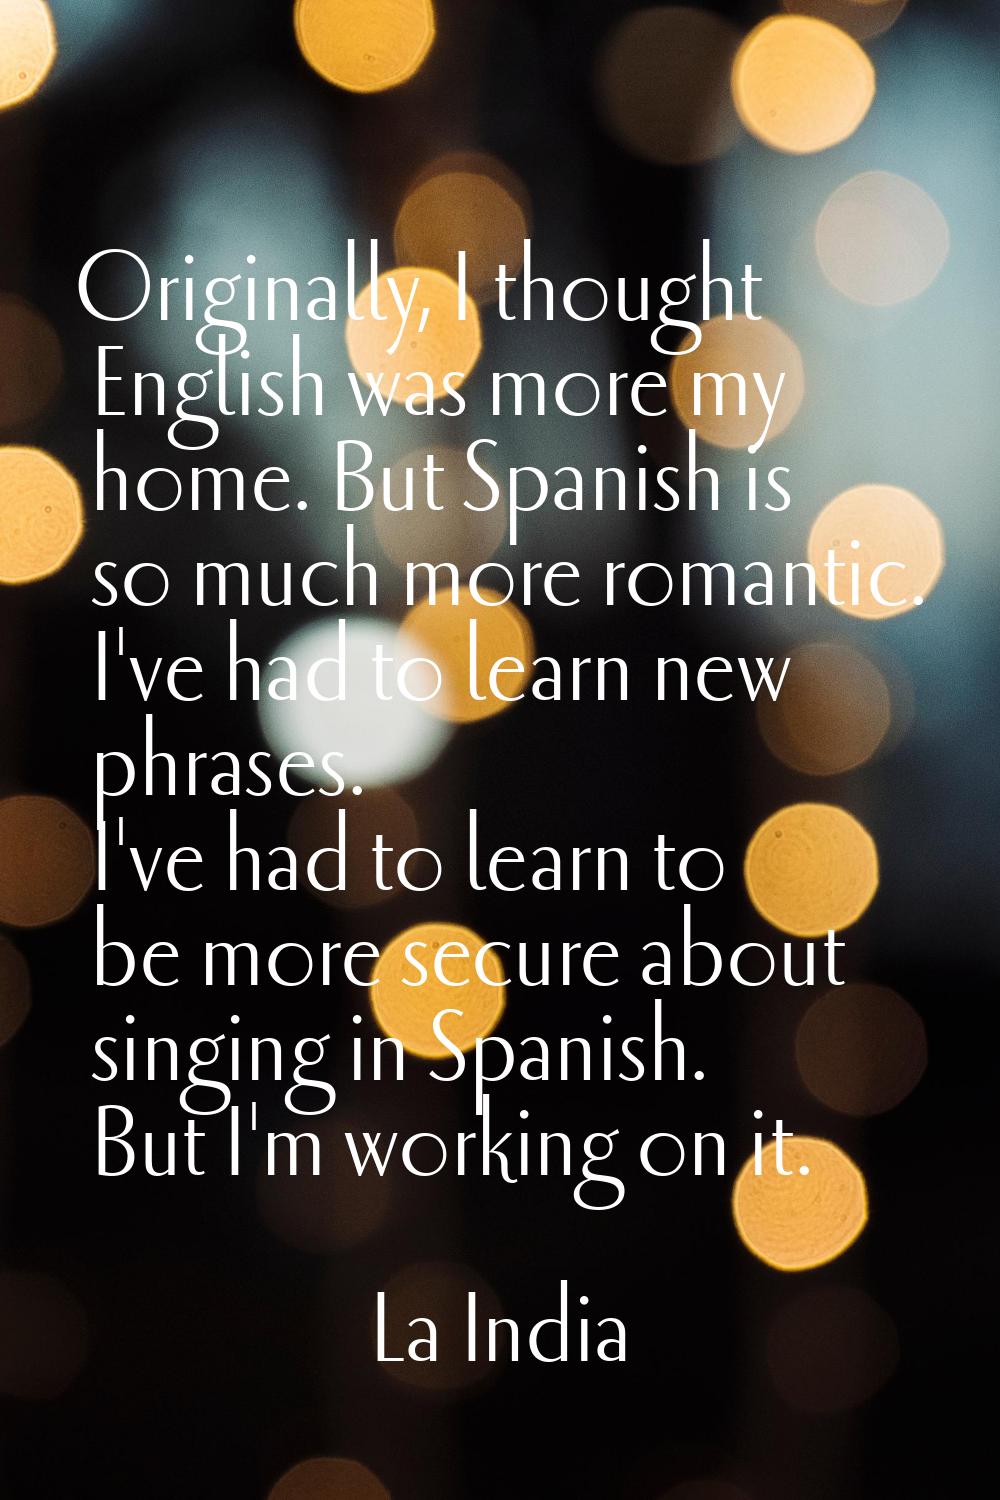 Originally, I thought English was more my home. But Spanish is so much more romantic. I've had to l